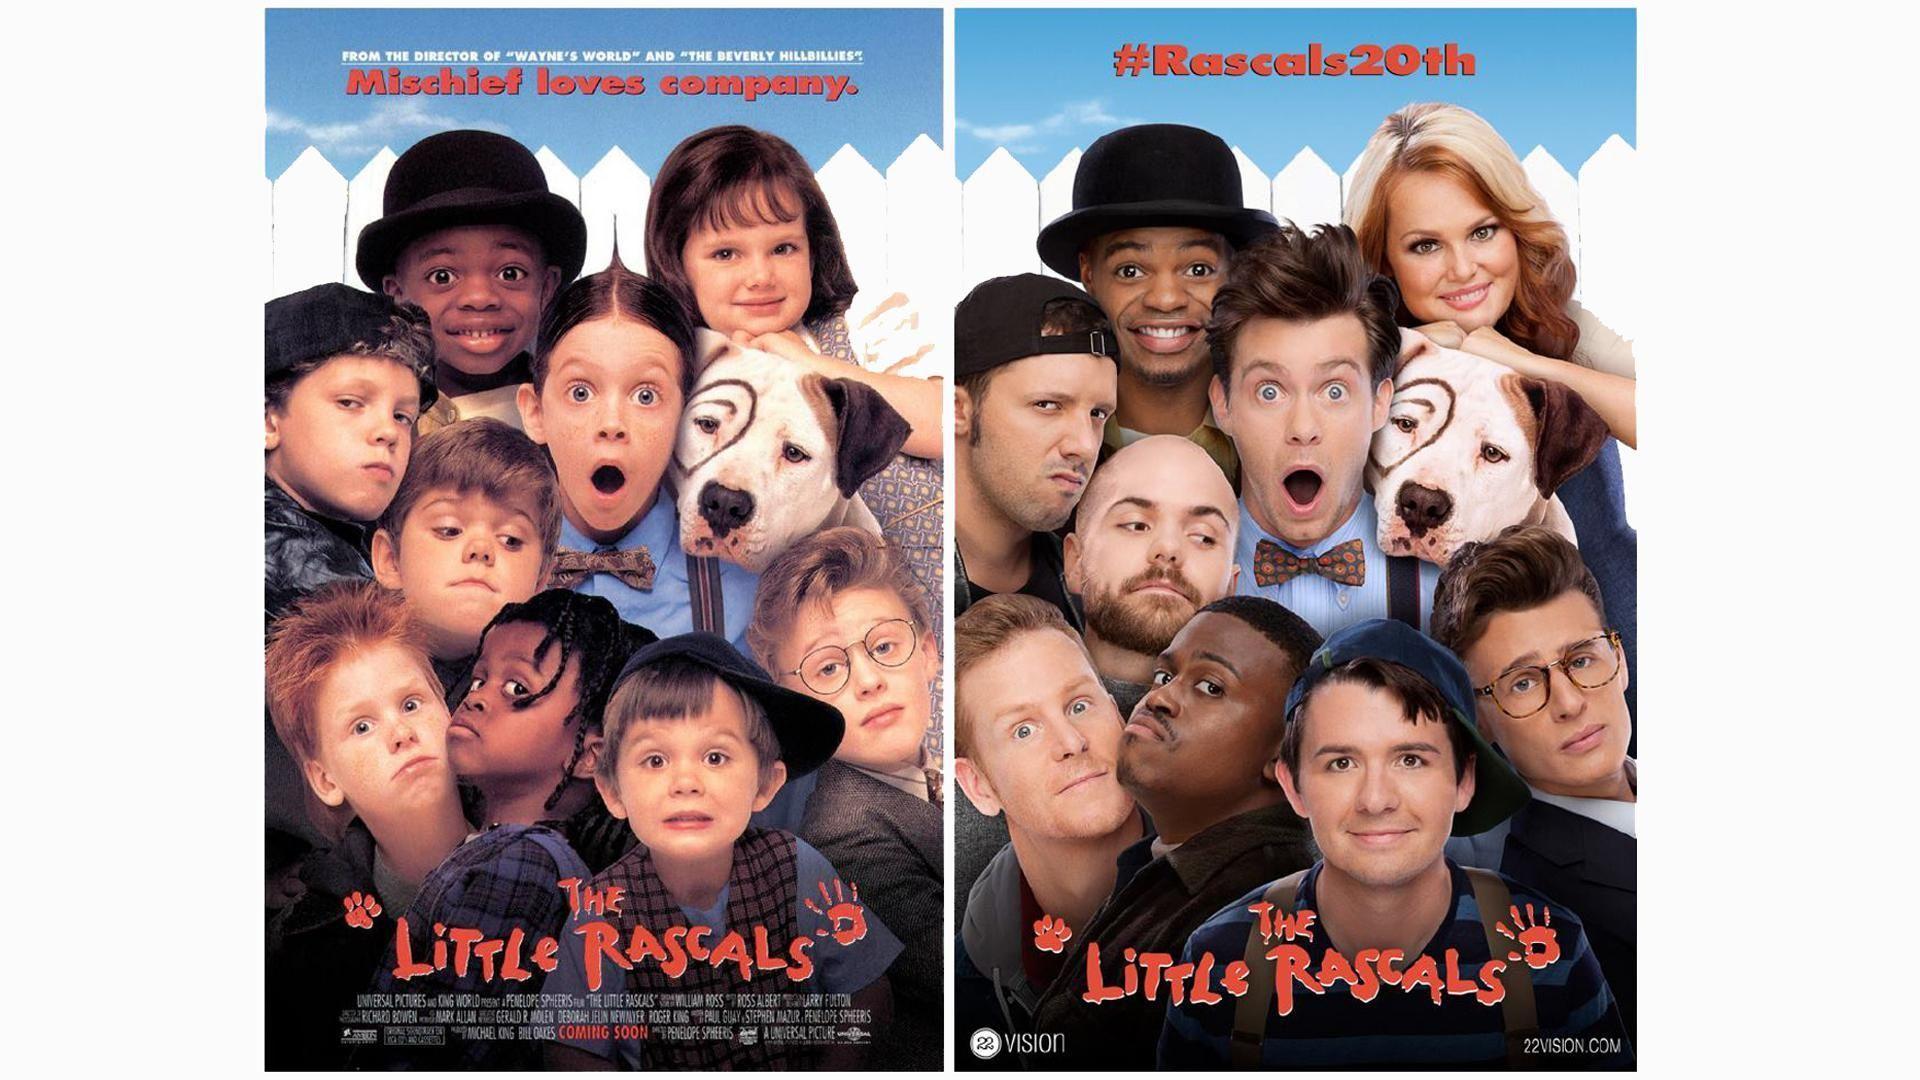 PHOTOS: The Little Rascals cast reunites 20 years later and is